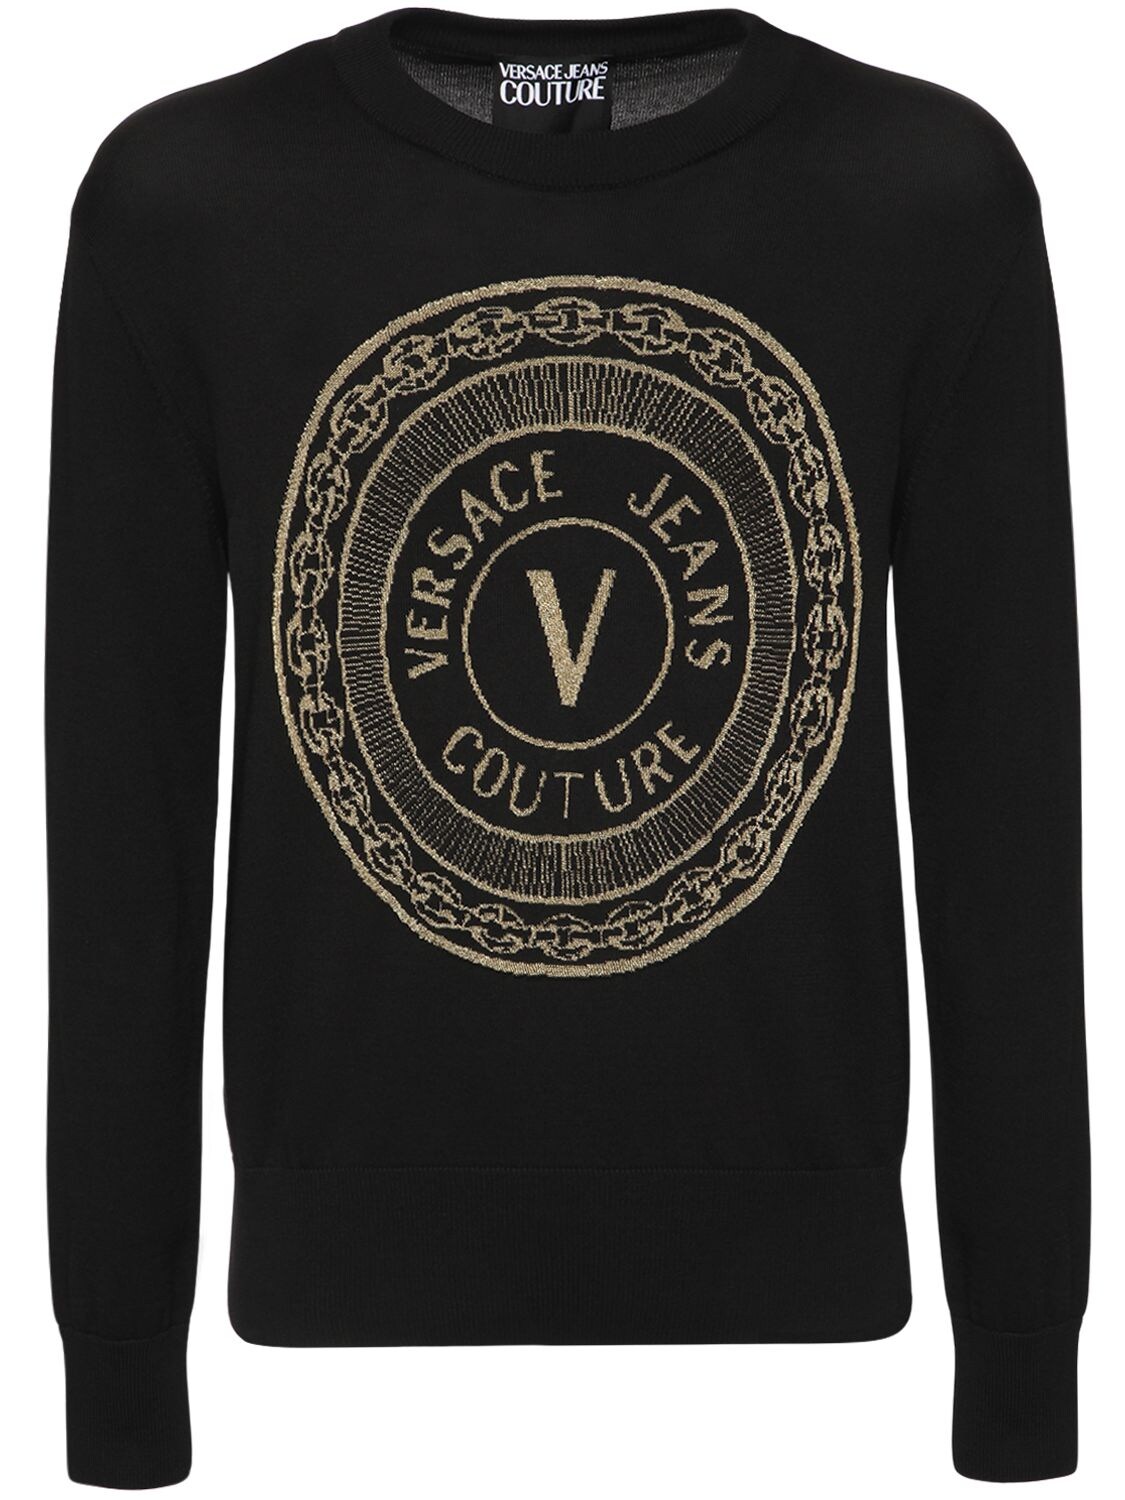 VERSACE JEANS COUTURE LOGO LUREX INTARSIA COTTON jumper,72IBQN030-SZQY0